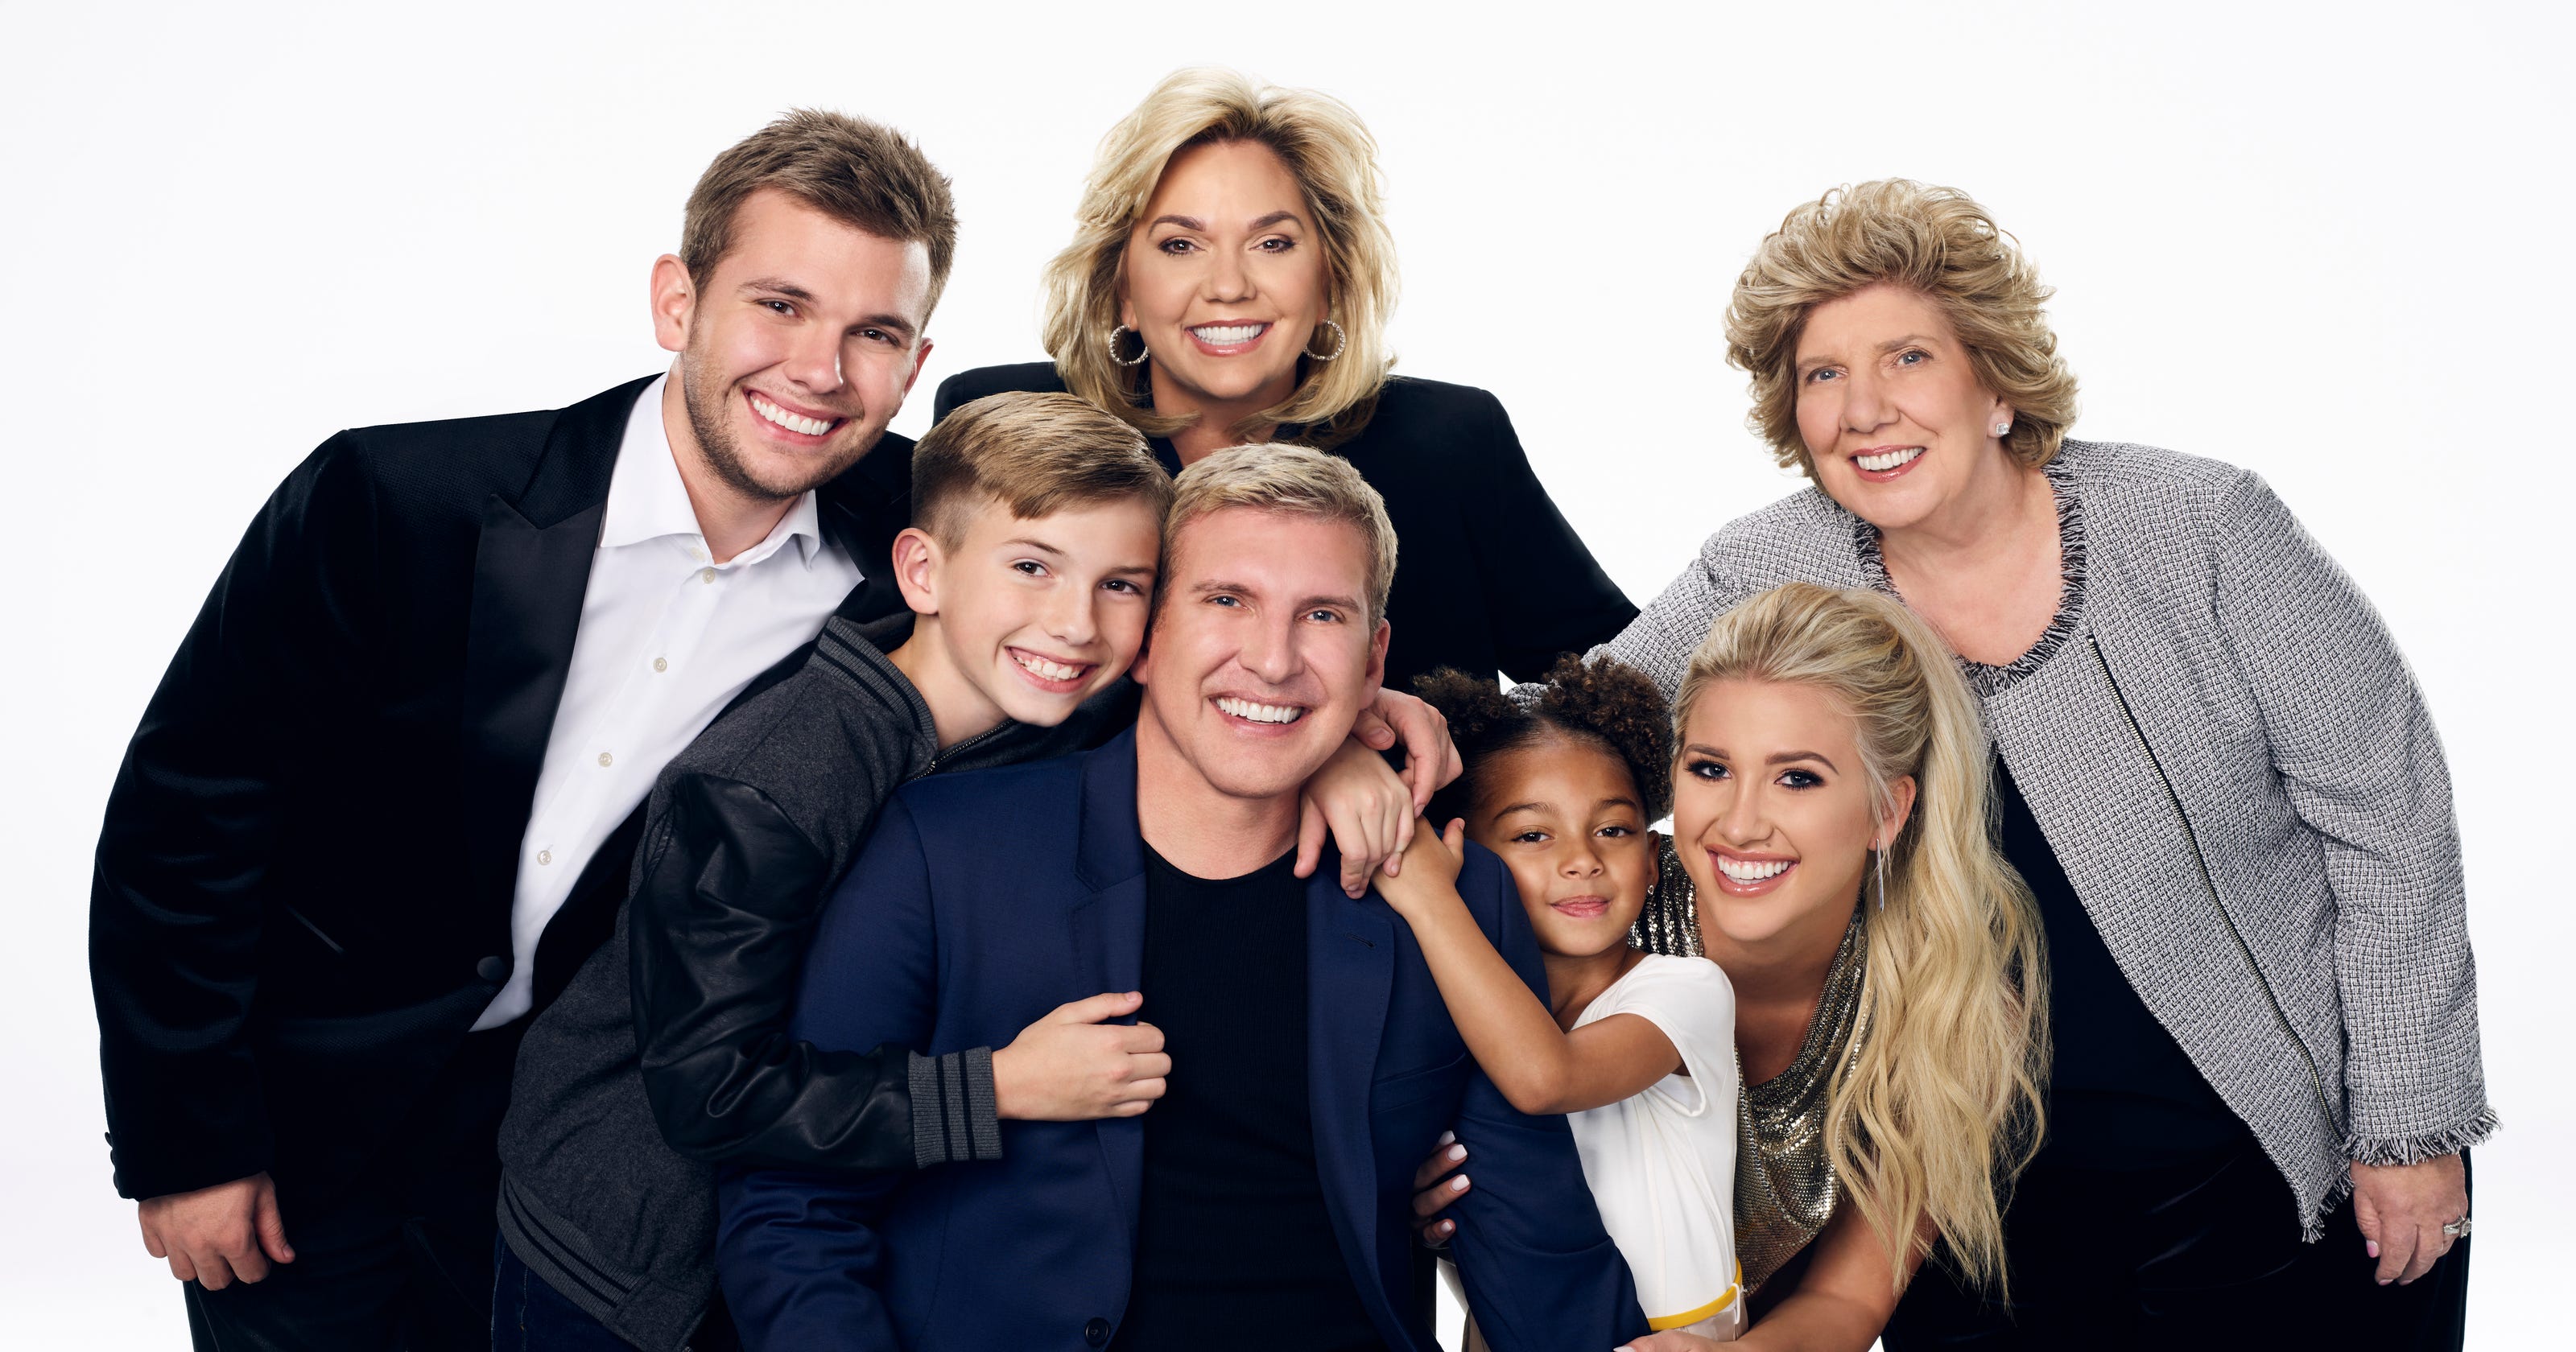 Chrisley tax evasion indictment: TV stars enter not-guilty plea in Georgia3200 x 1680